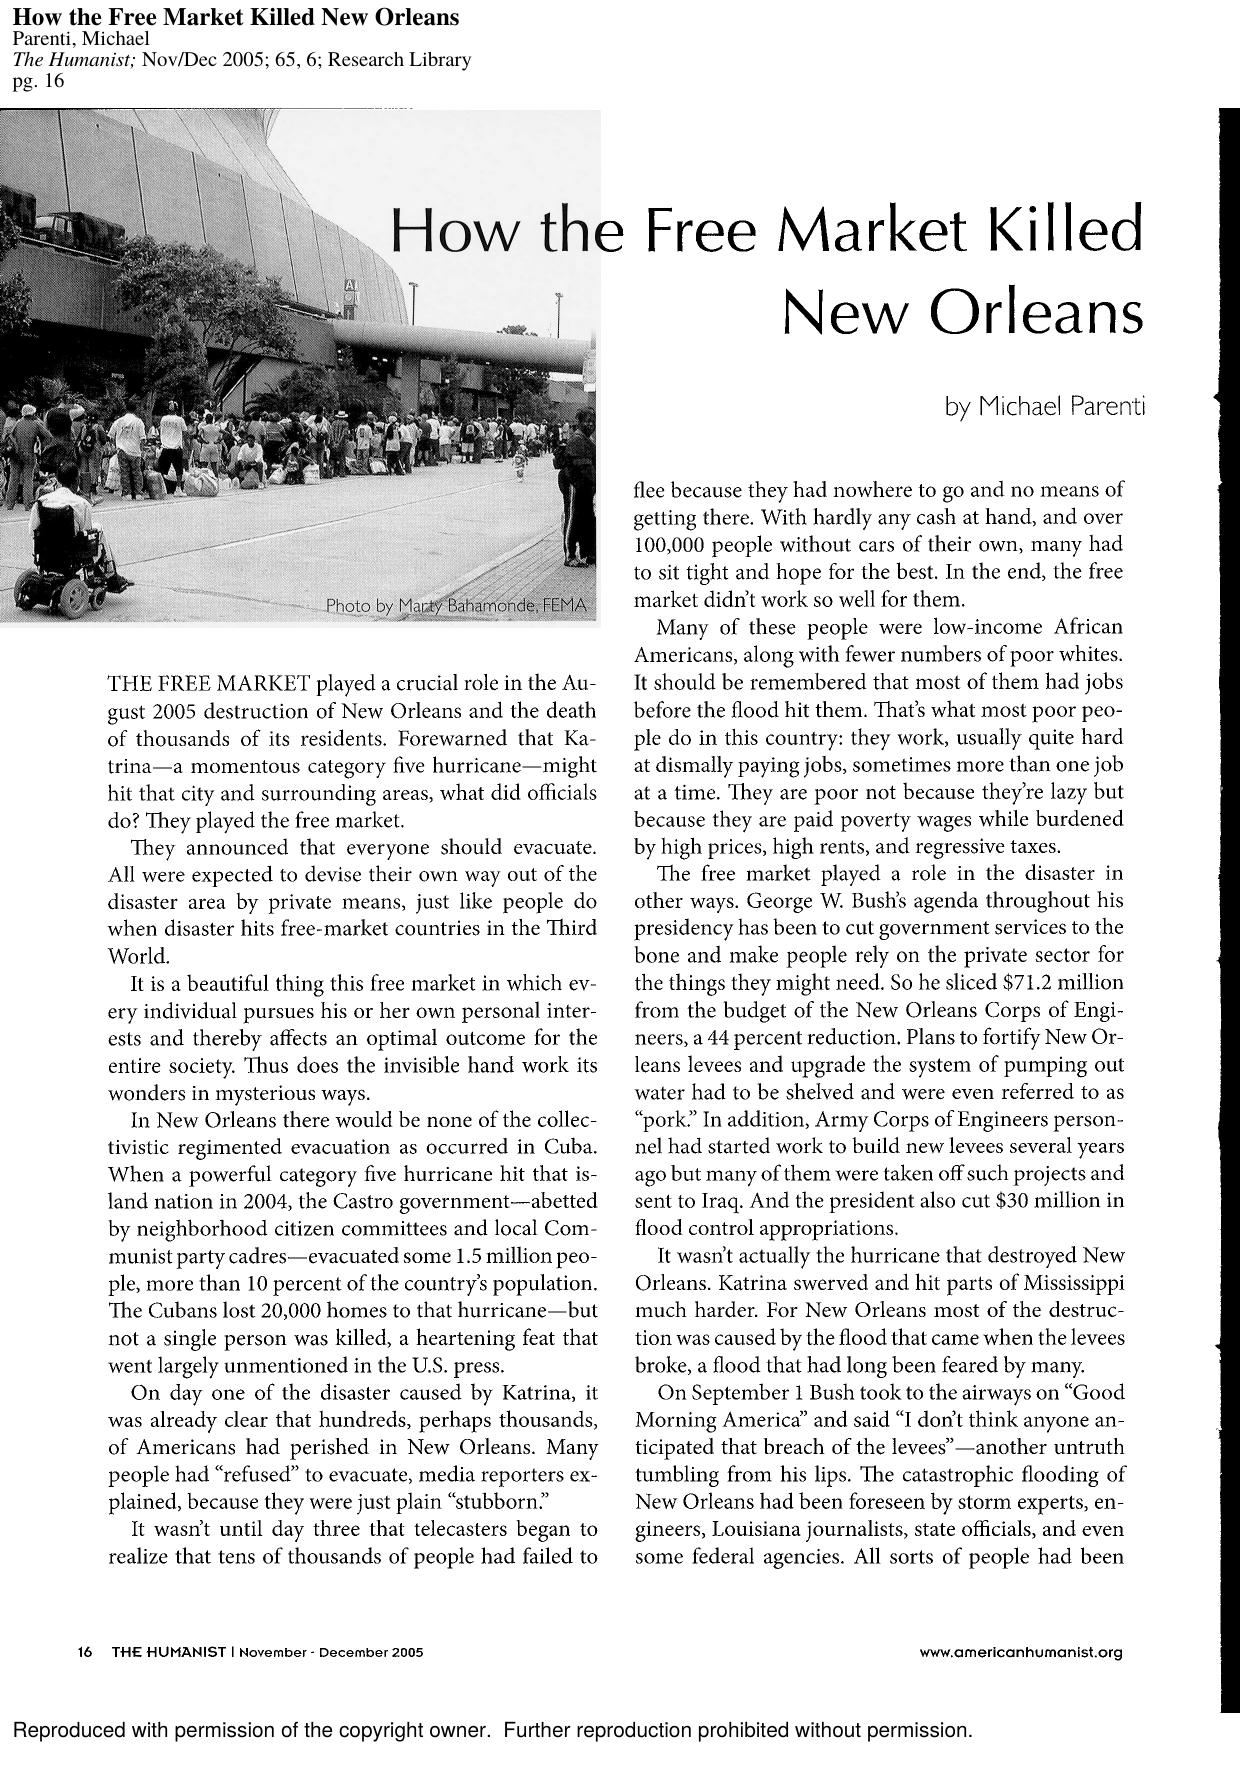 How the Free Market Killed New Orleans by Unknown